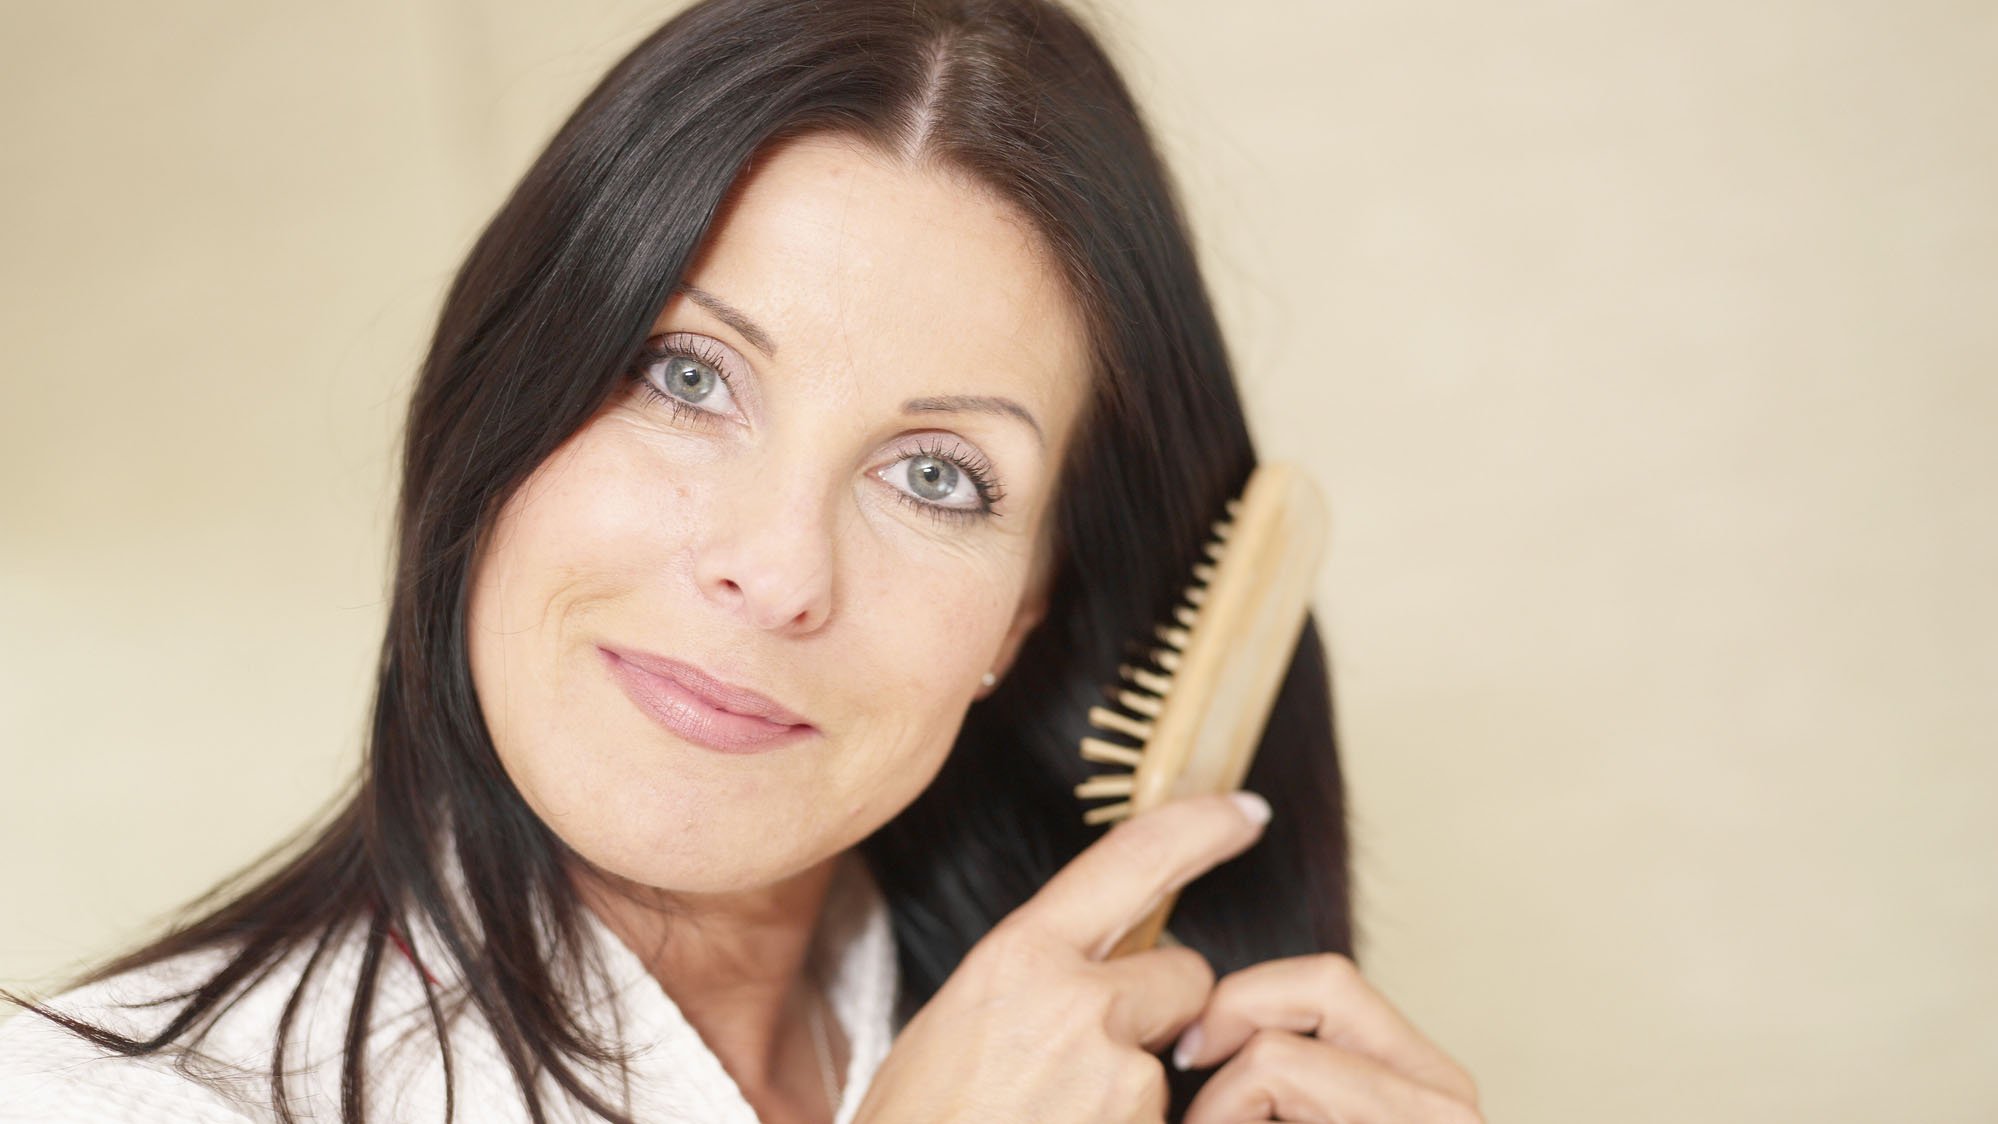 5 Tips for Regrowing Hair Naturally